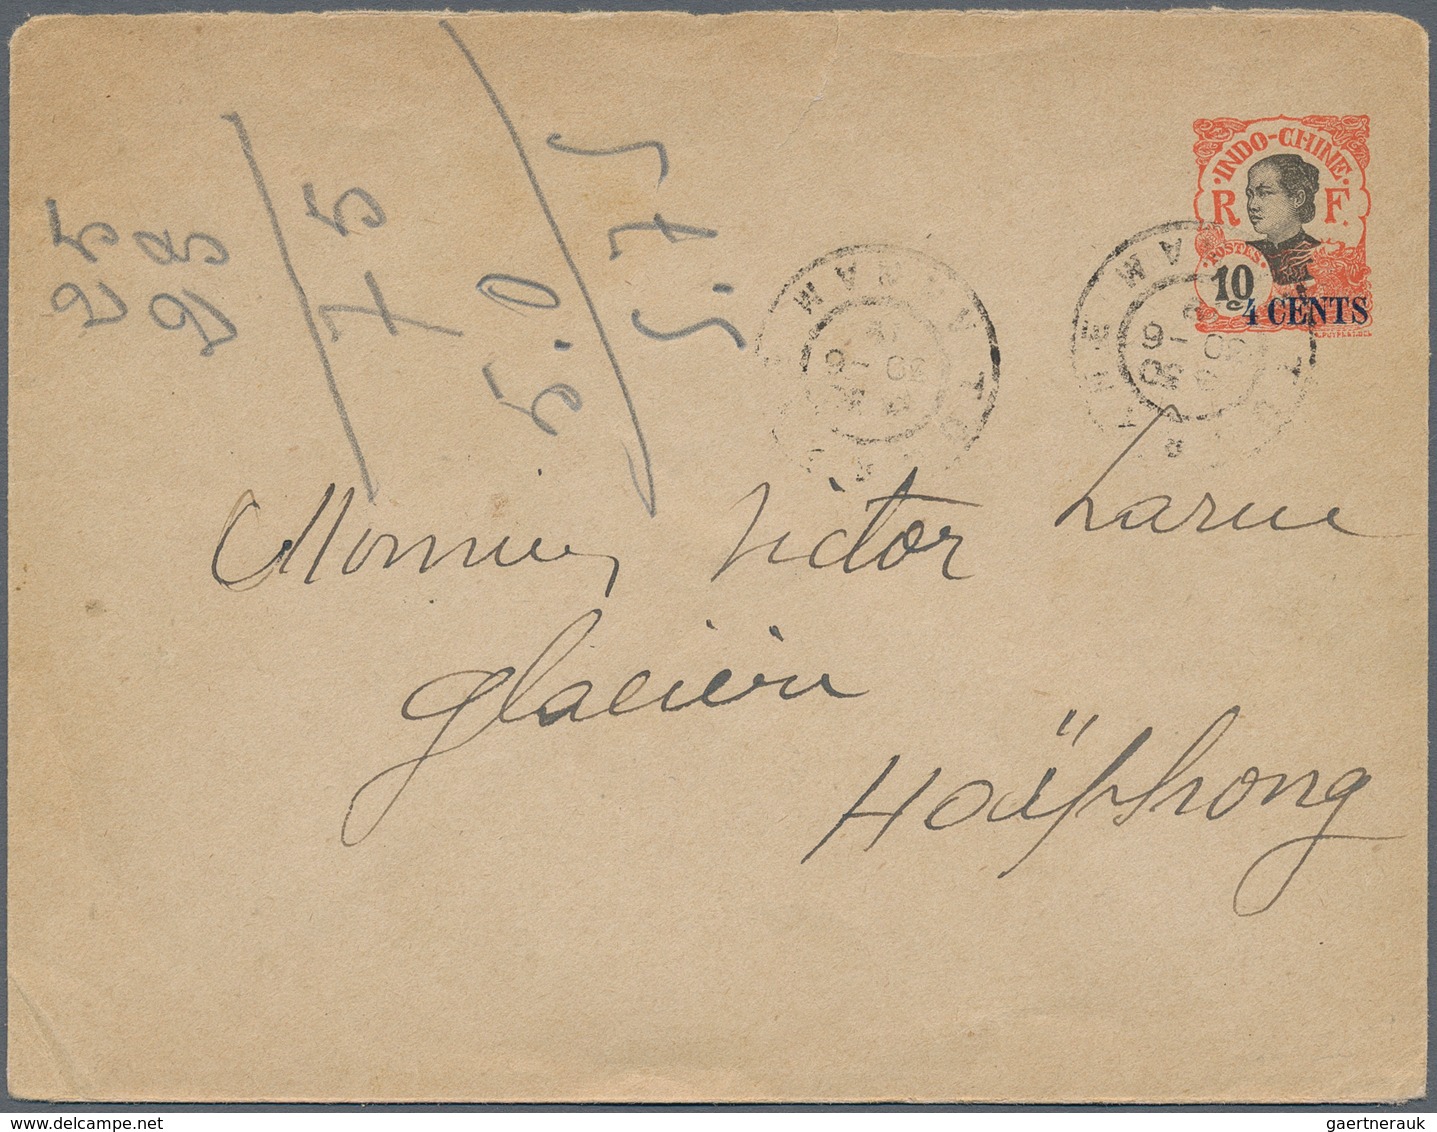 Asien: 1900/2000 (ca.), holding of several hundred covers/cards, comprising China, Vietnam, French I